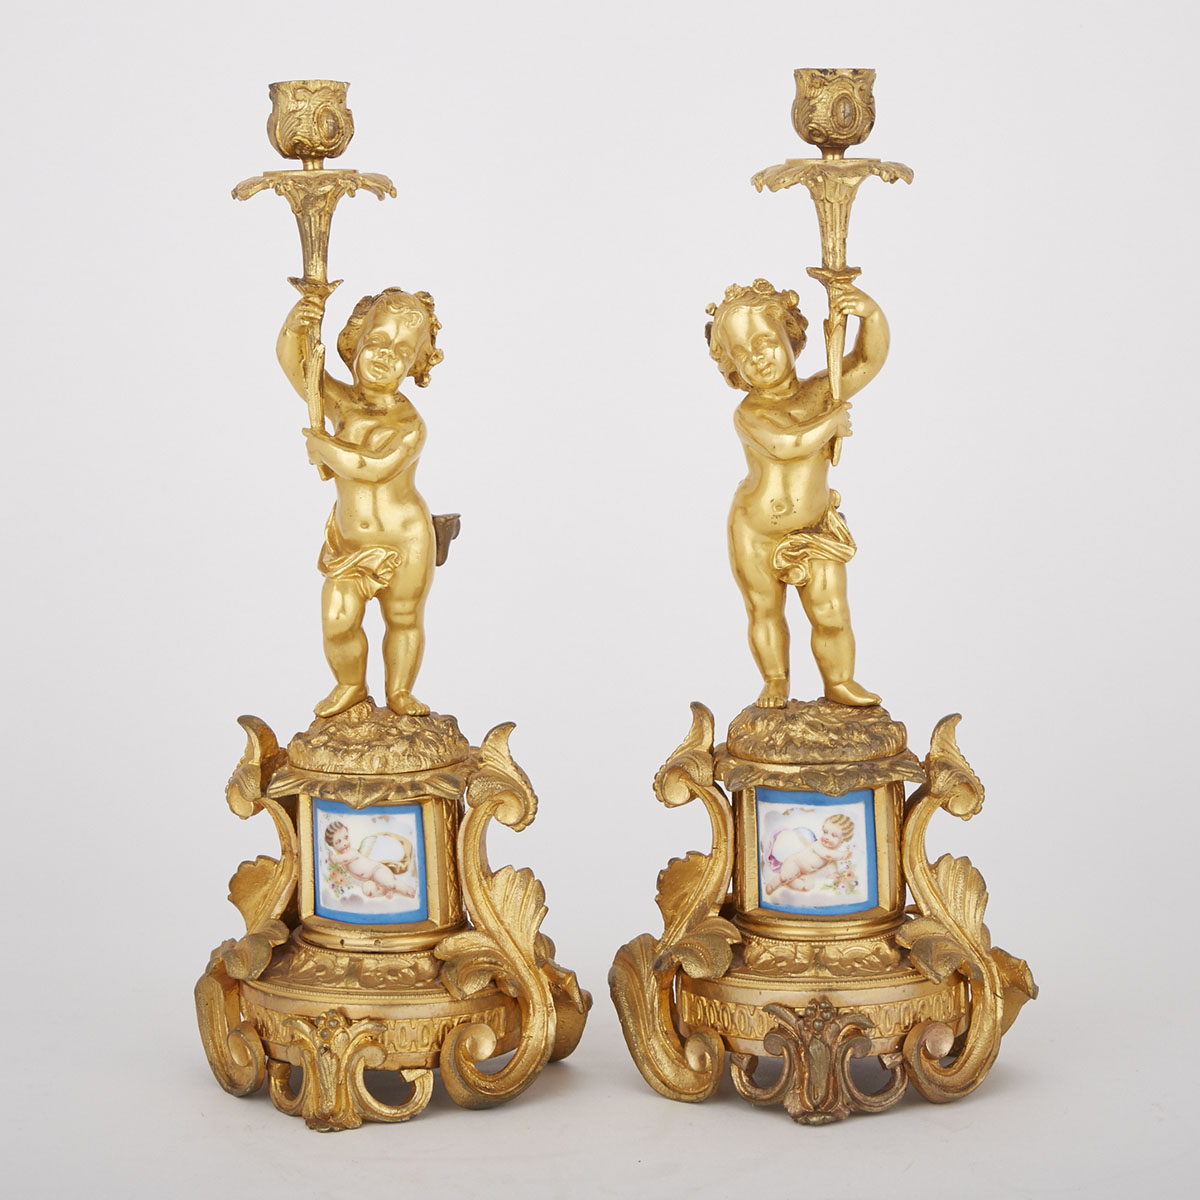 Pair of French Sevres Style Porcelain Mounted Gilt Bronze Figural Candlesticks, c.1870